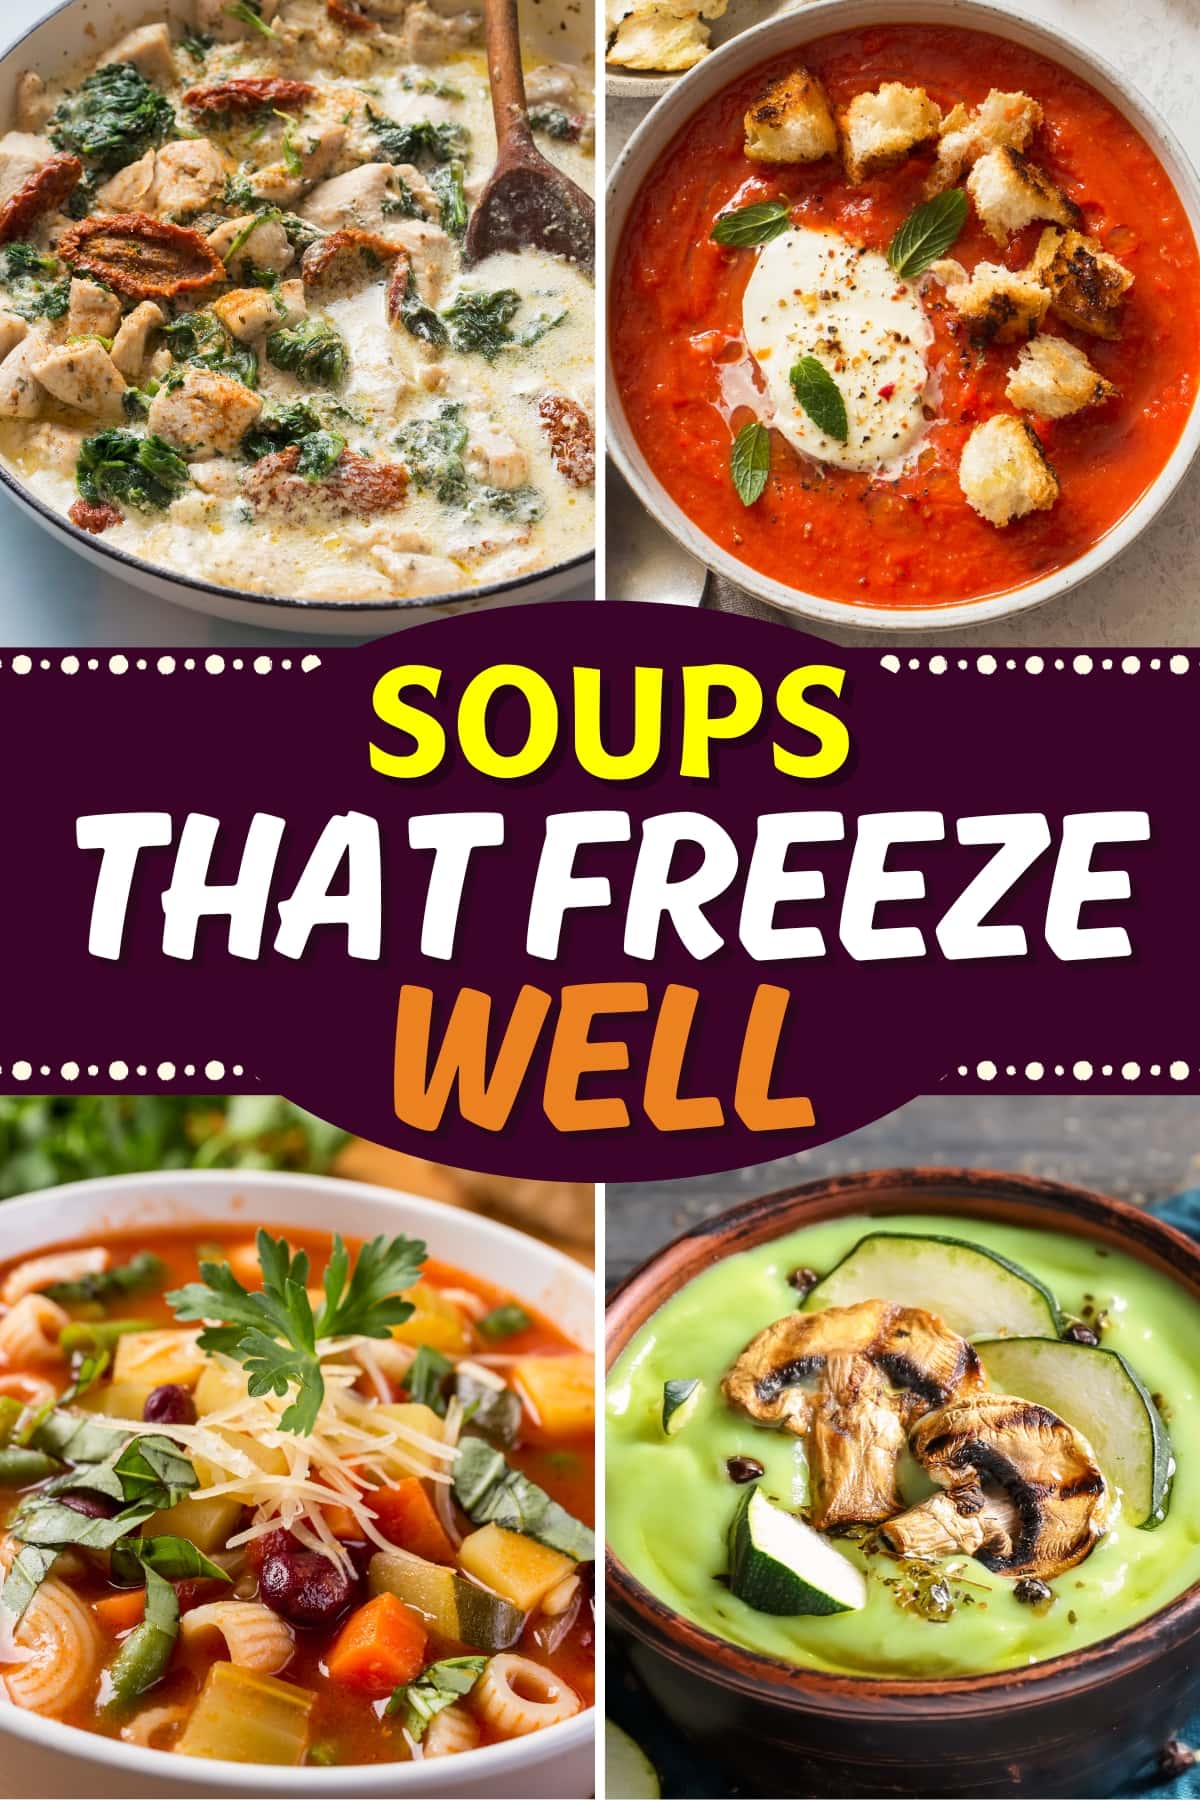 Soups That Freeze Well